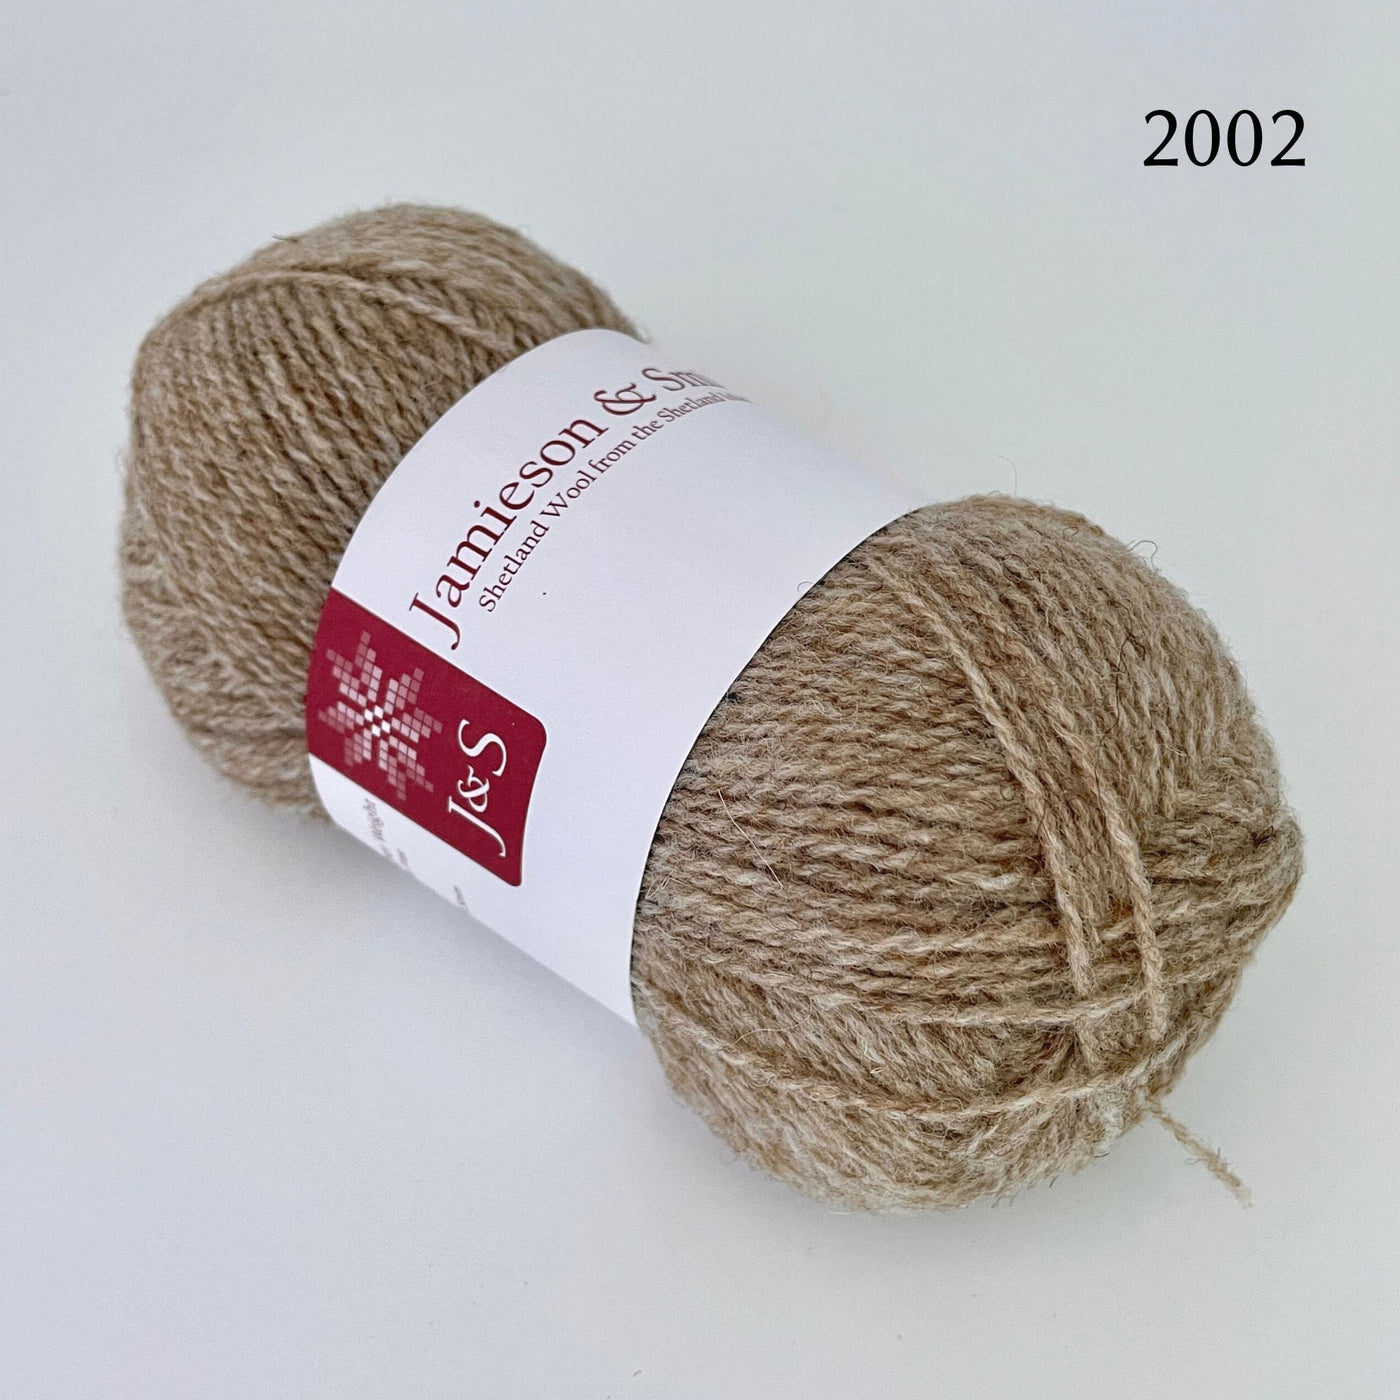 A ball of Jamieson & Smith Shetland Supreme, a fingering weight wool yarn, in color 2002, Mooskit, a light tan